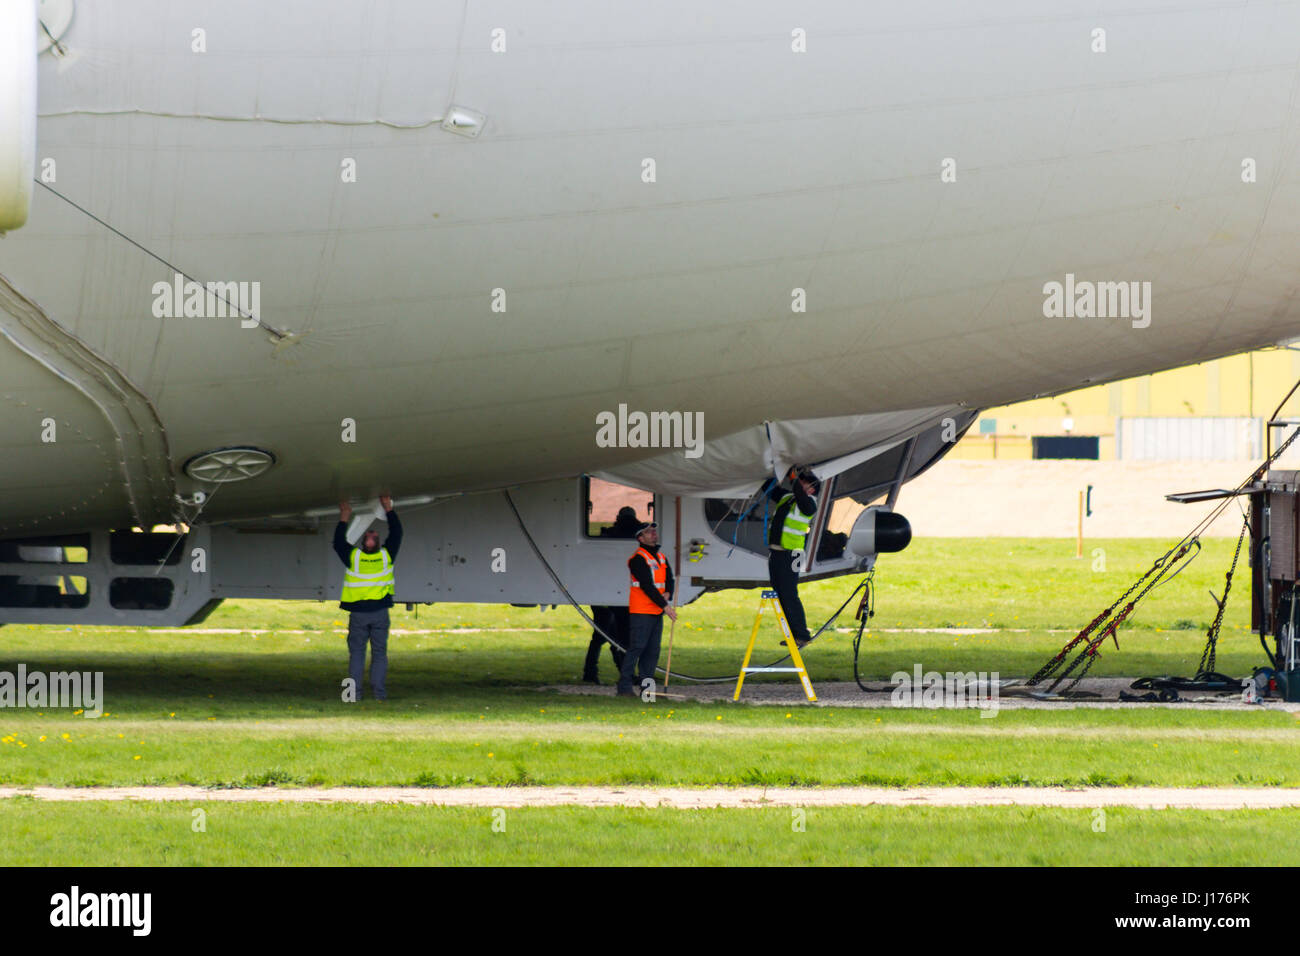 Cardington, UK. 18th Apr, 2017. The Hybrid Air Vehicles Airlander 10 is moored to the new Mobile Mooring Mast as engineers and ground crew check the Auxiliary Landing System (ALS), which has been added to allow the aircraft to land safely at a greater range of landing angles.. The aircraft is almost ready to begin it's 2017 flight test programme. Photo Credit: Mick Flynn/Alamy Live News Stock Photo